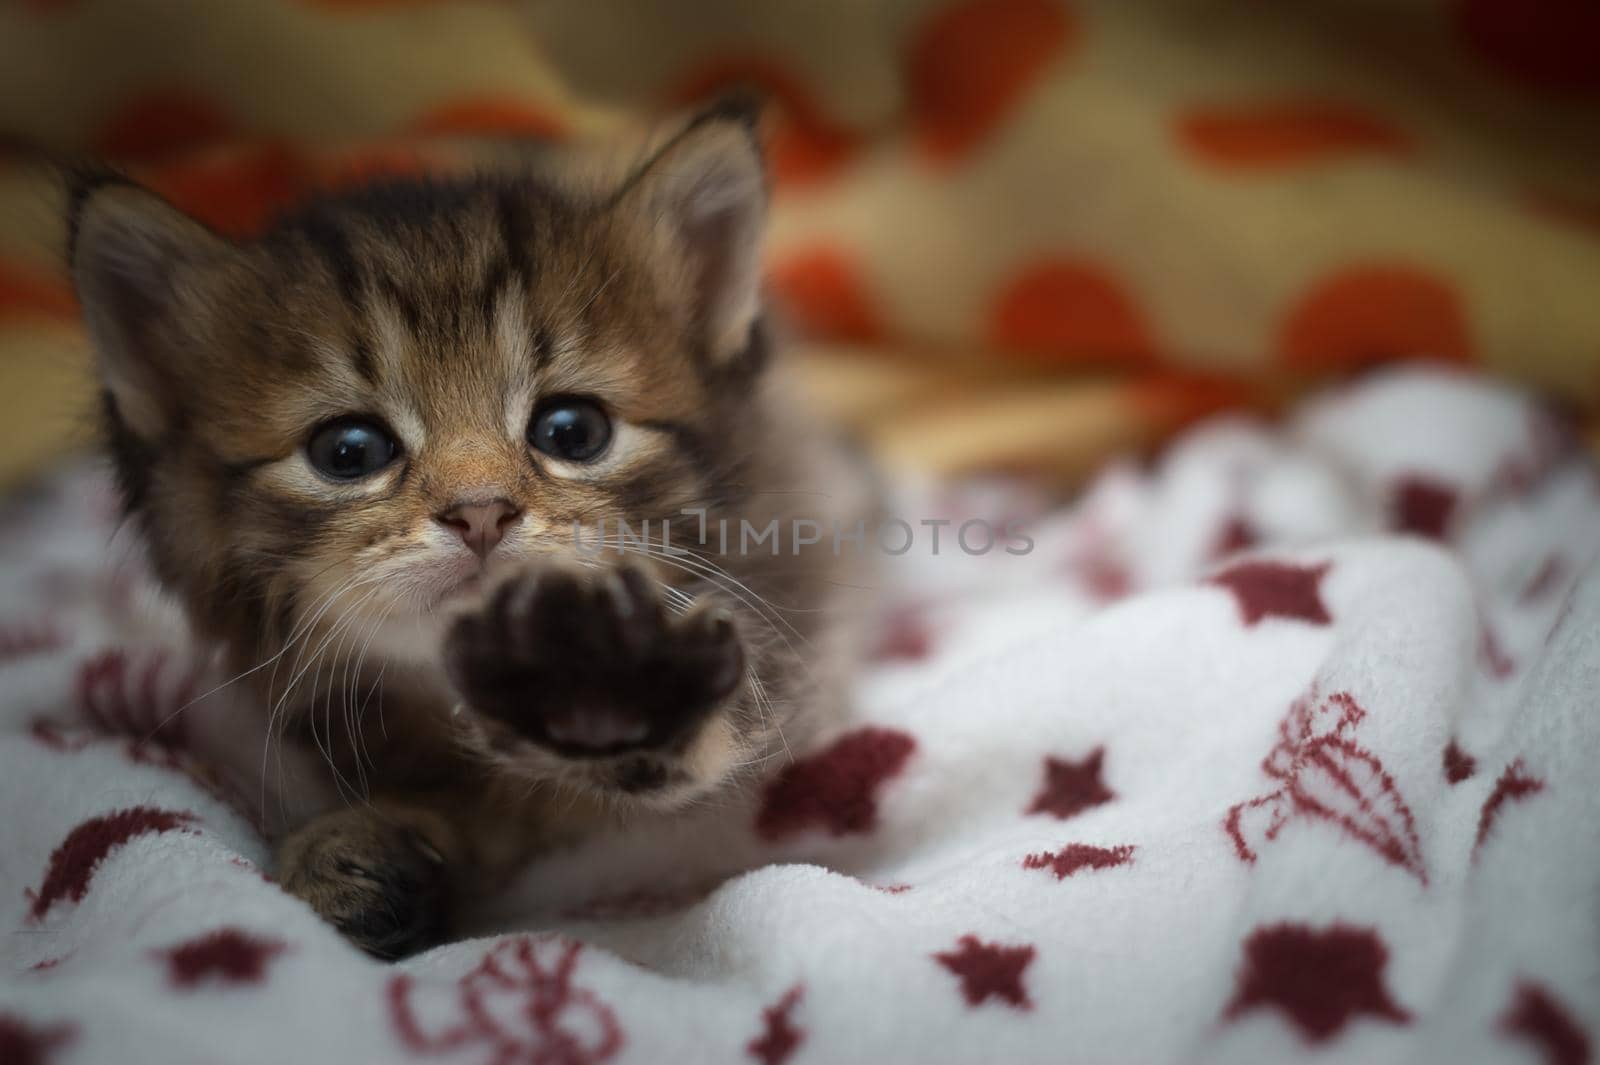 A striped kitten shows a paw in close-up.